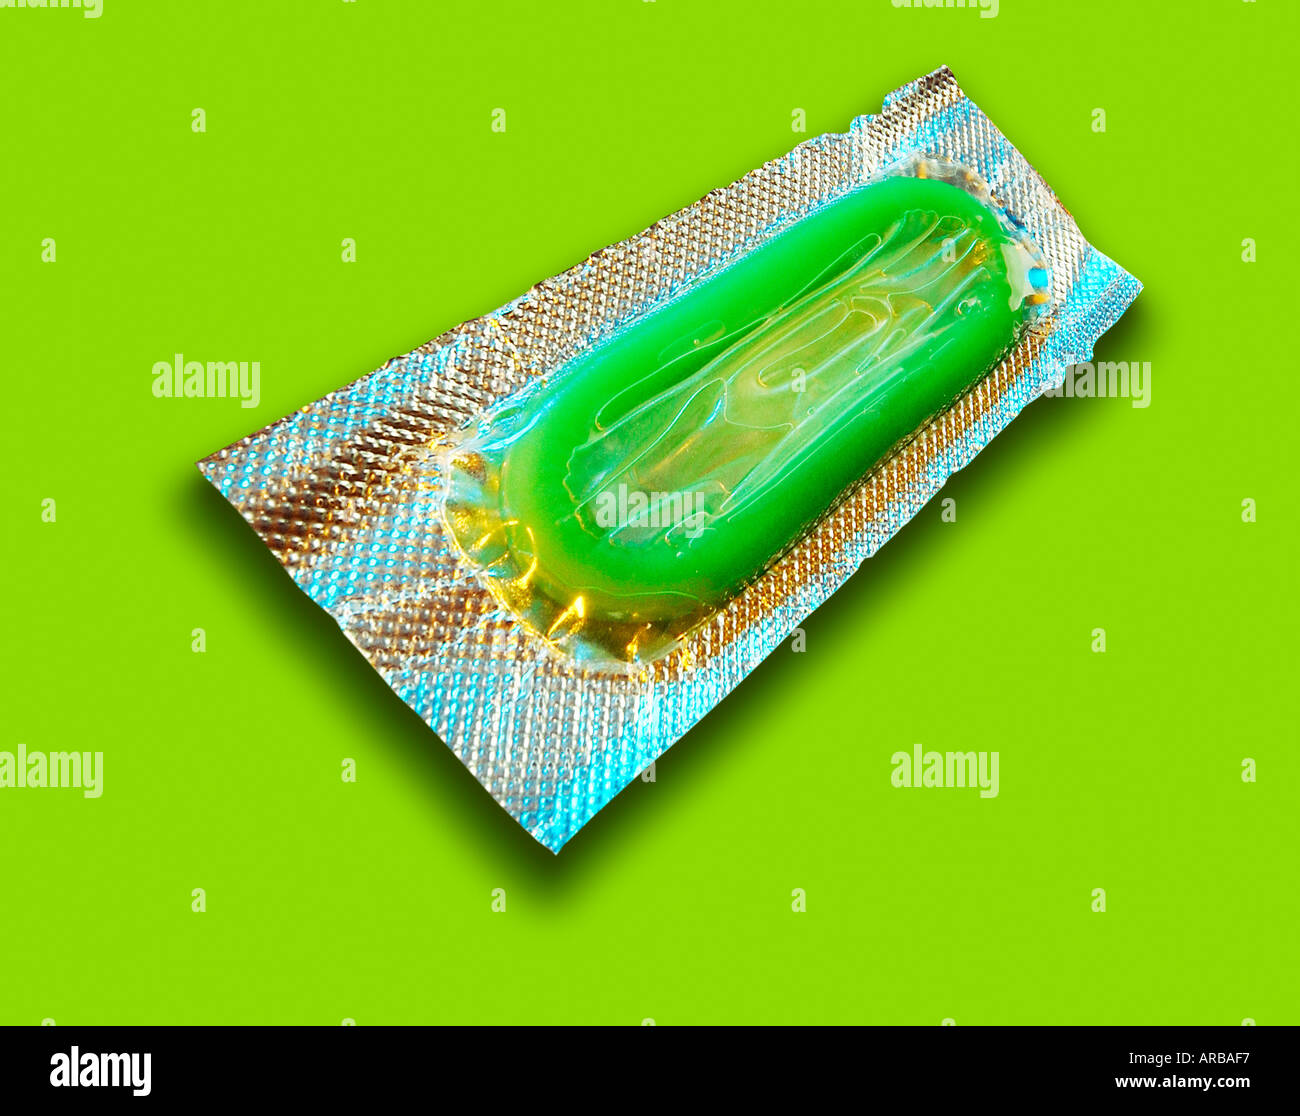 SINGLE GREEN CONDOM IN FOIL WRAPPER ON GREEN BACKGROUND Stock Photo - Alamy